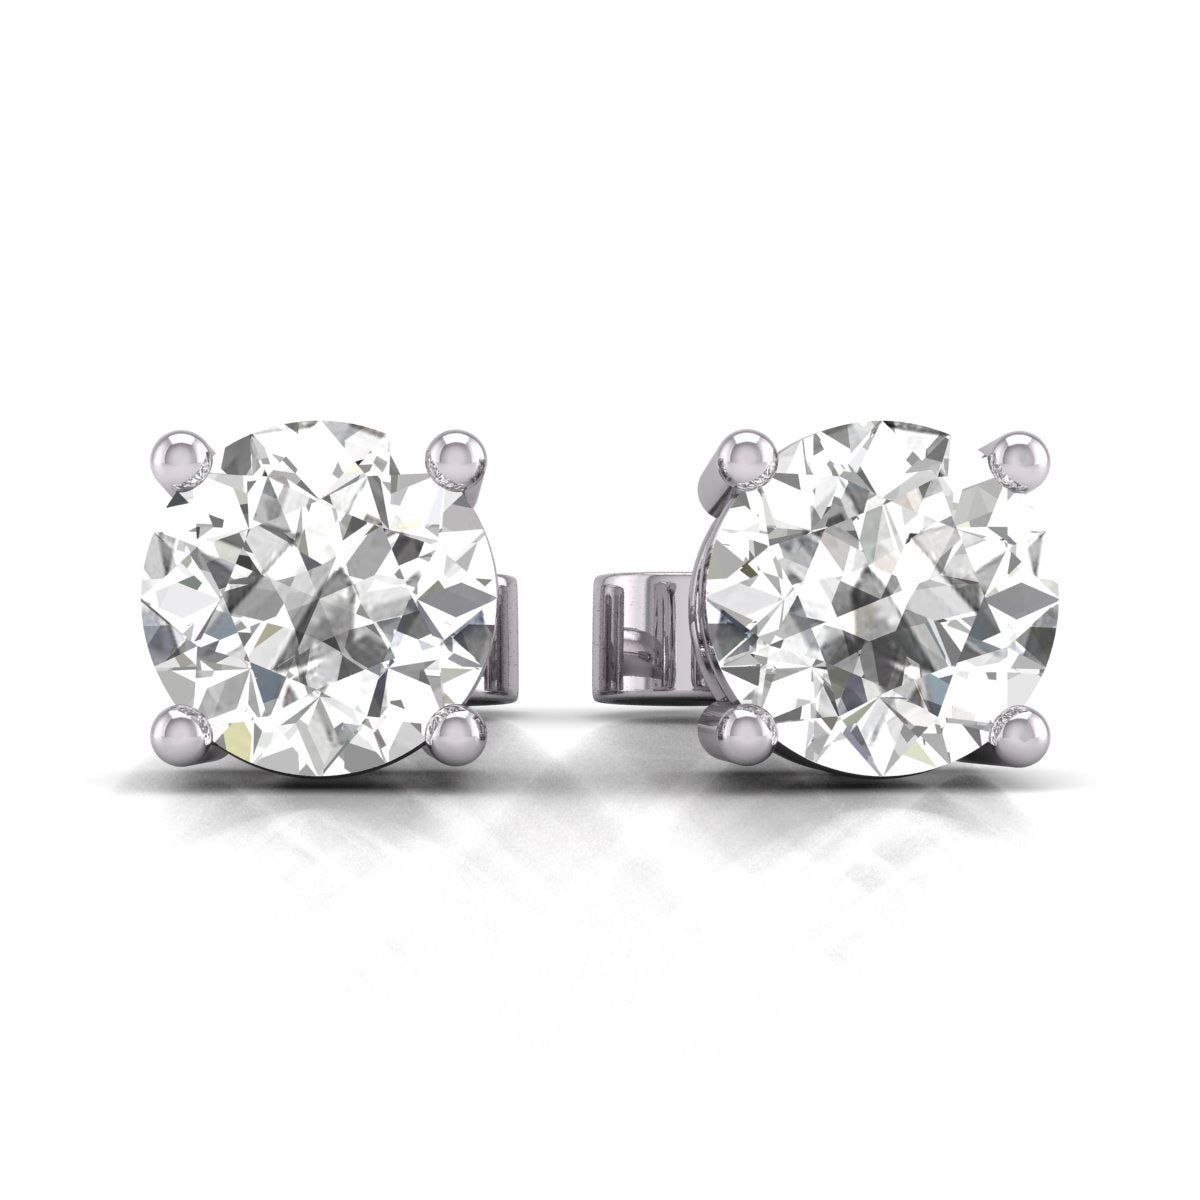 IGI Certified 3 Carat TW Lab Grown Diamond Solitaire Stud Earrings in 14K White & Yellow Gold with Secure Push Back 4 Prong Setting (F-G Color VS-SI Clarity)